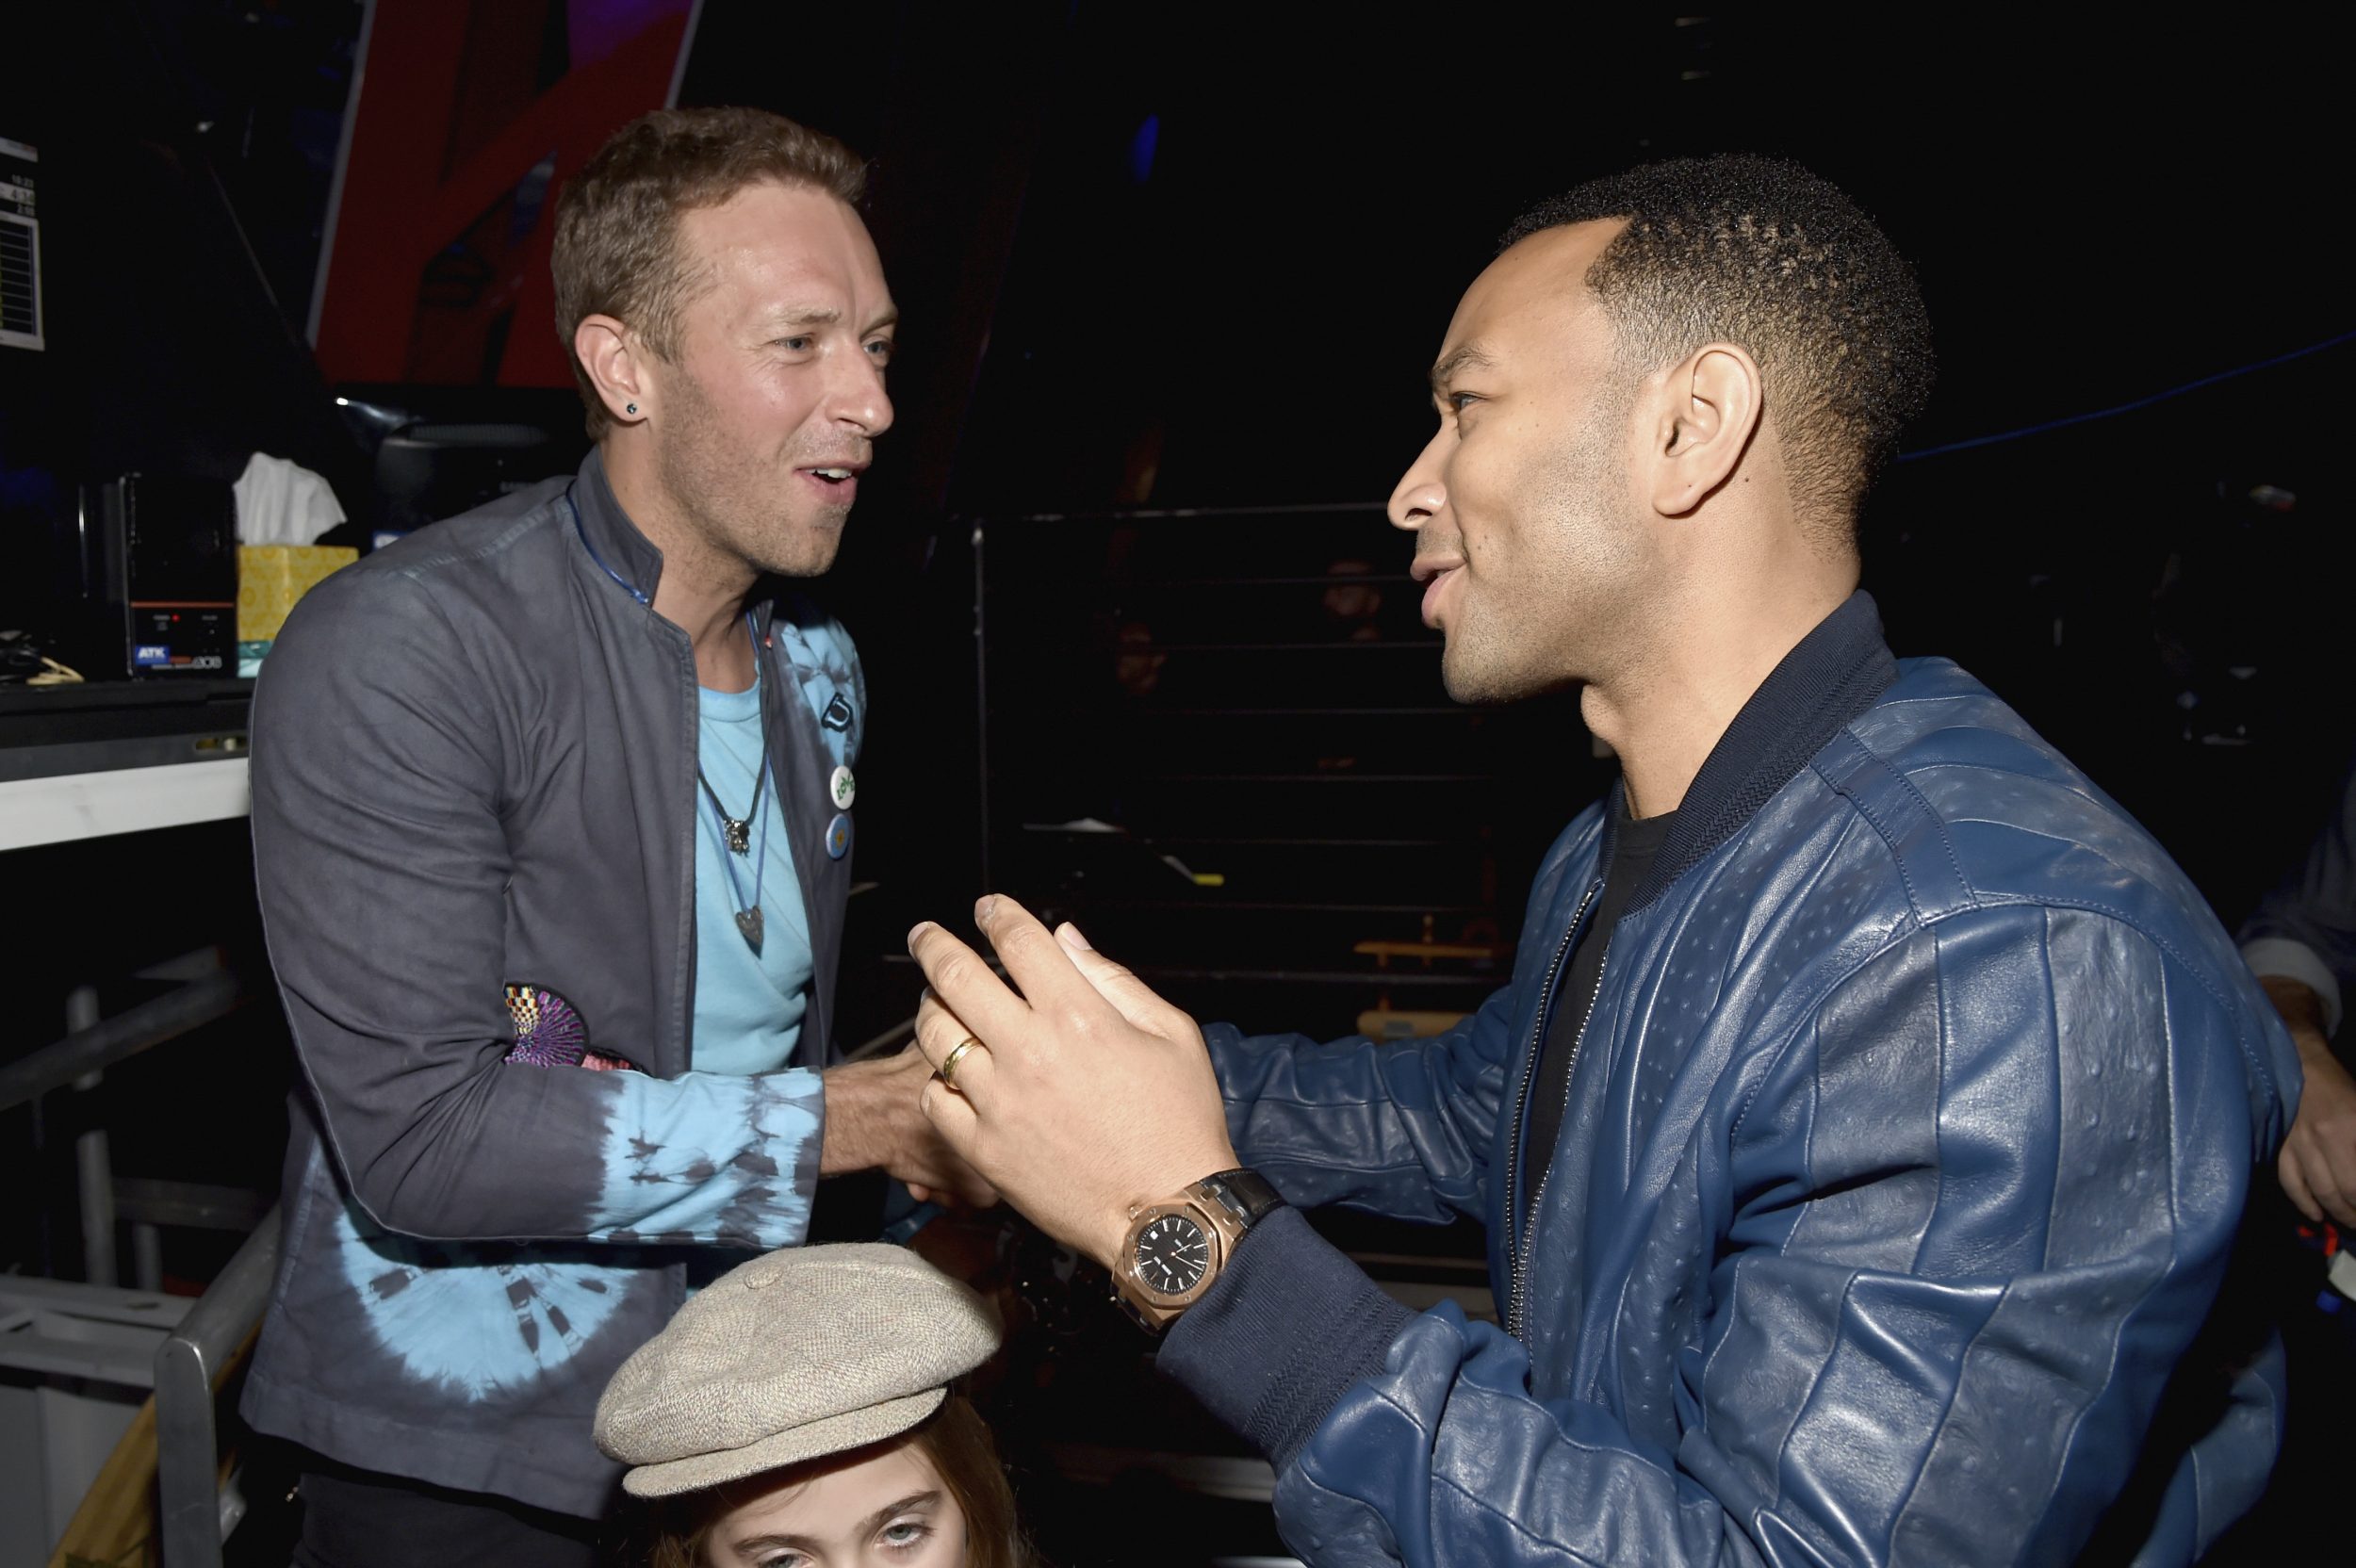 INGLEWOOD, CA - MARCH 05: Musicians Chris Martin (L) and John Legend speak backstage at the 2017 iHeartRadio Music Awards which broadcast live on Turner's TBS, TNT, and truTV at The Forum on March 5, 2017 in Inglewood, California. (Photo by Frazer Harrison/Getty Images for iHeartMedia) *** Local Caption *** Chris Martin; John Legend